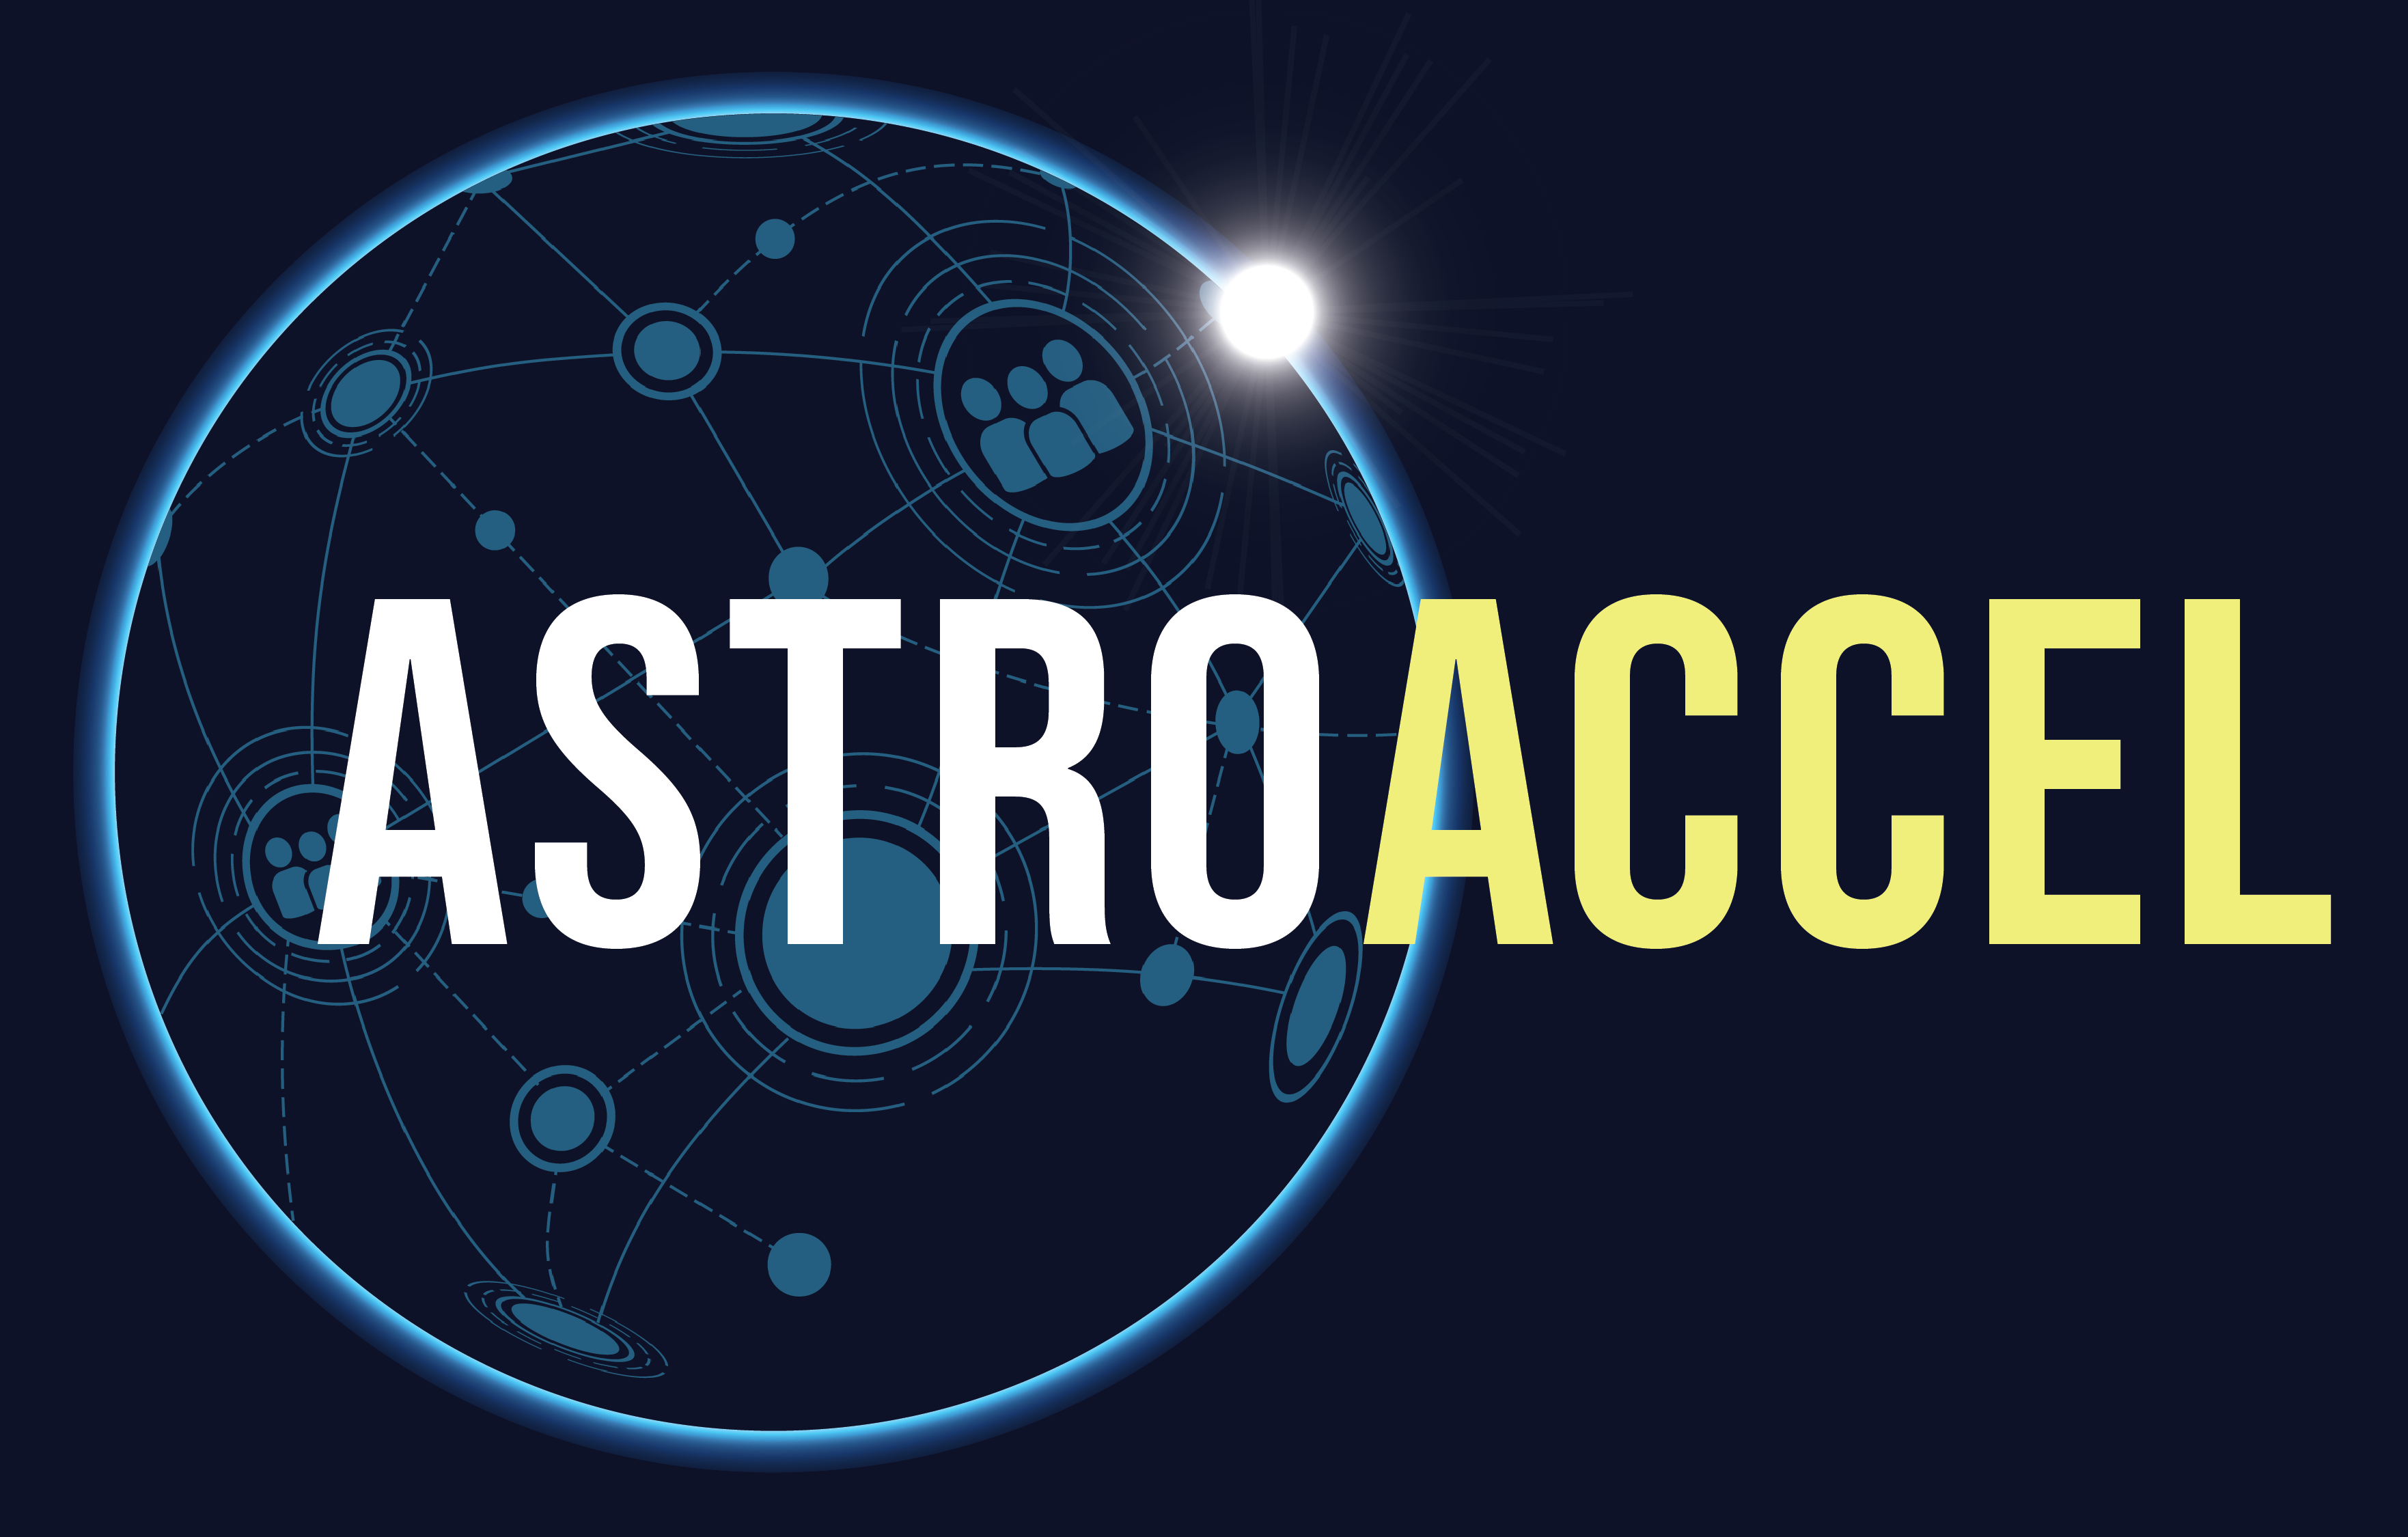 Astro Accel logo: A transparent circle with a blue outline and a networking map comprised of circles and lines. A small bright orb shines in the top right corner. "Astro Accel" is across the circle.